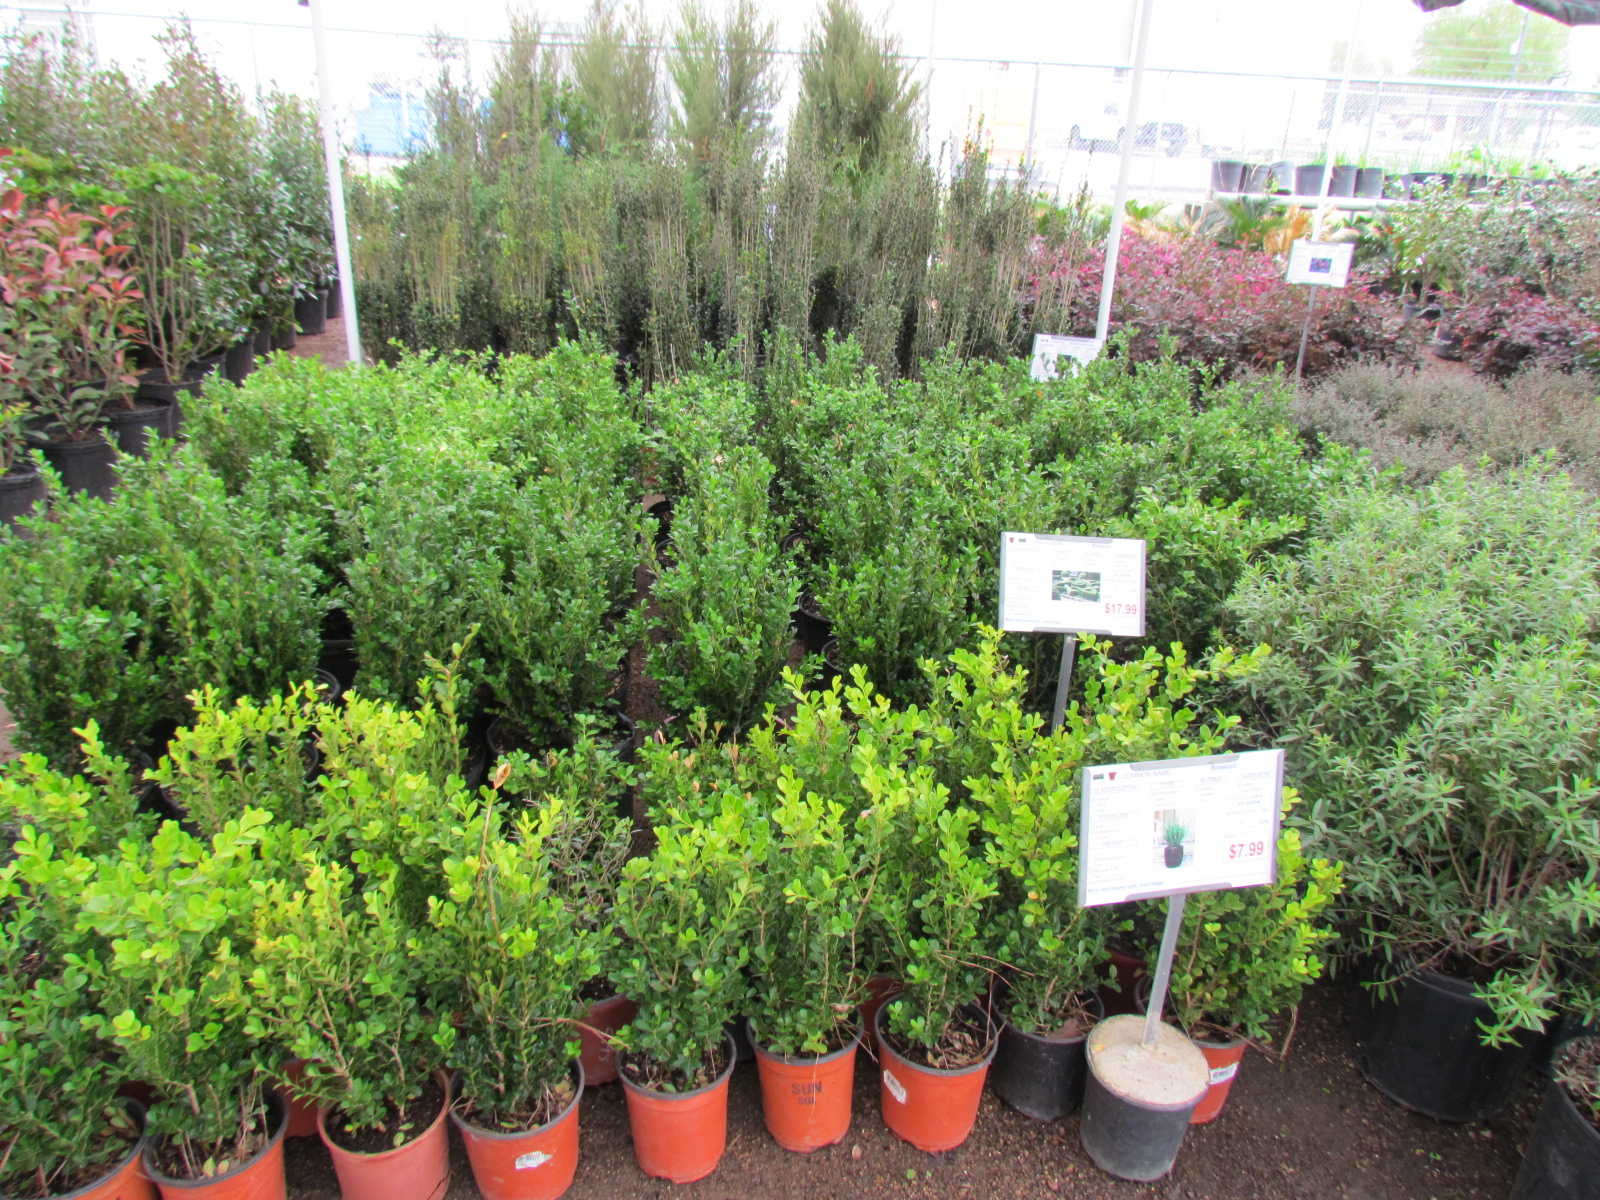 Large variety of shrubs including Encore Azaleas, Boxwoods, Yaupons, Crotons, Drift Roses and more at J&J Nursery, Spring, TX